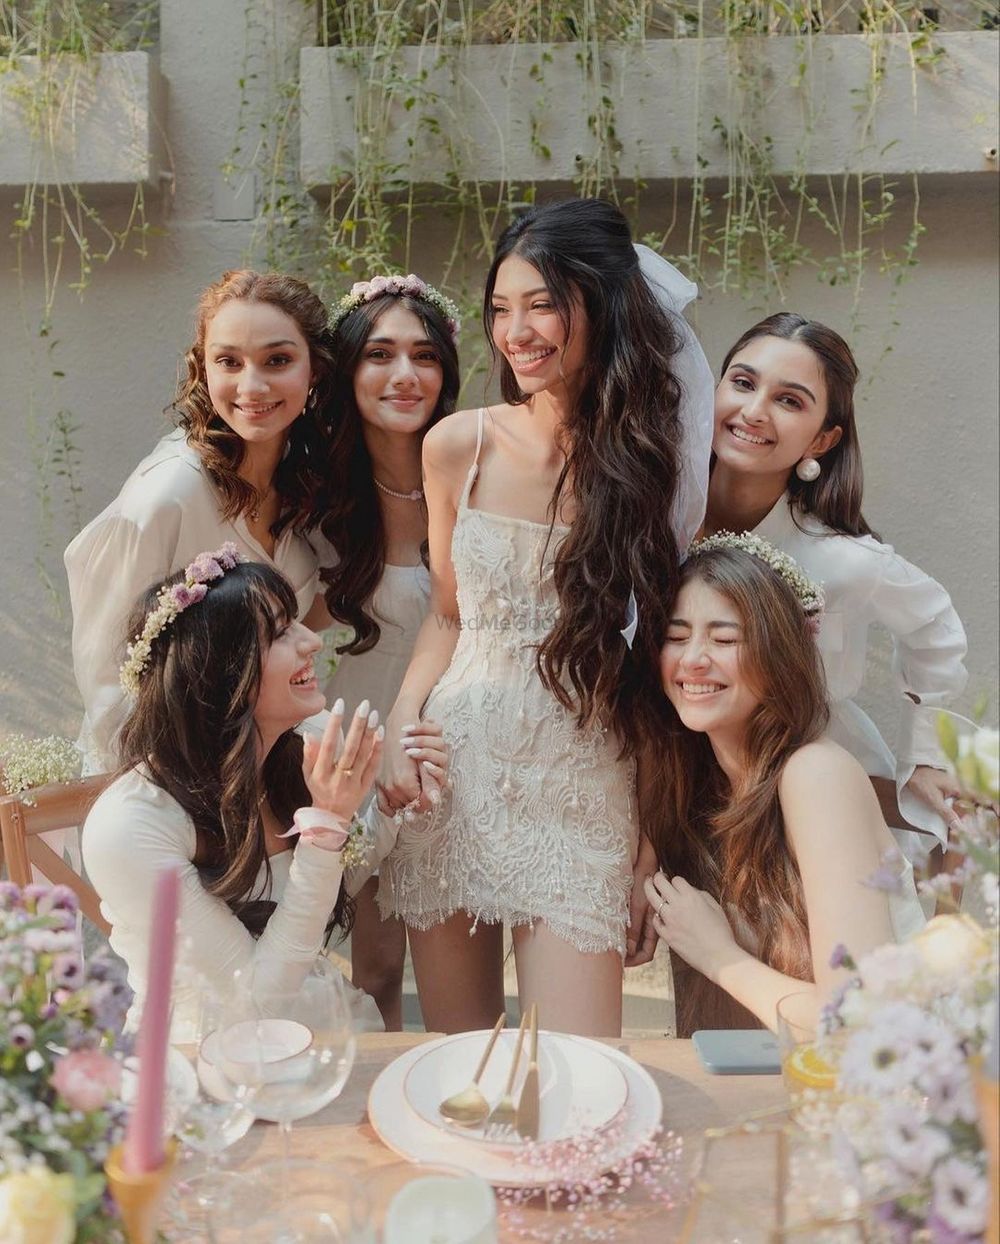 Photo of Alanna with her bridesmaids in white outfits.